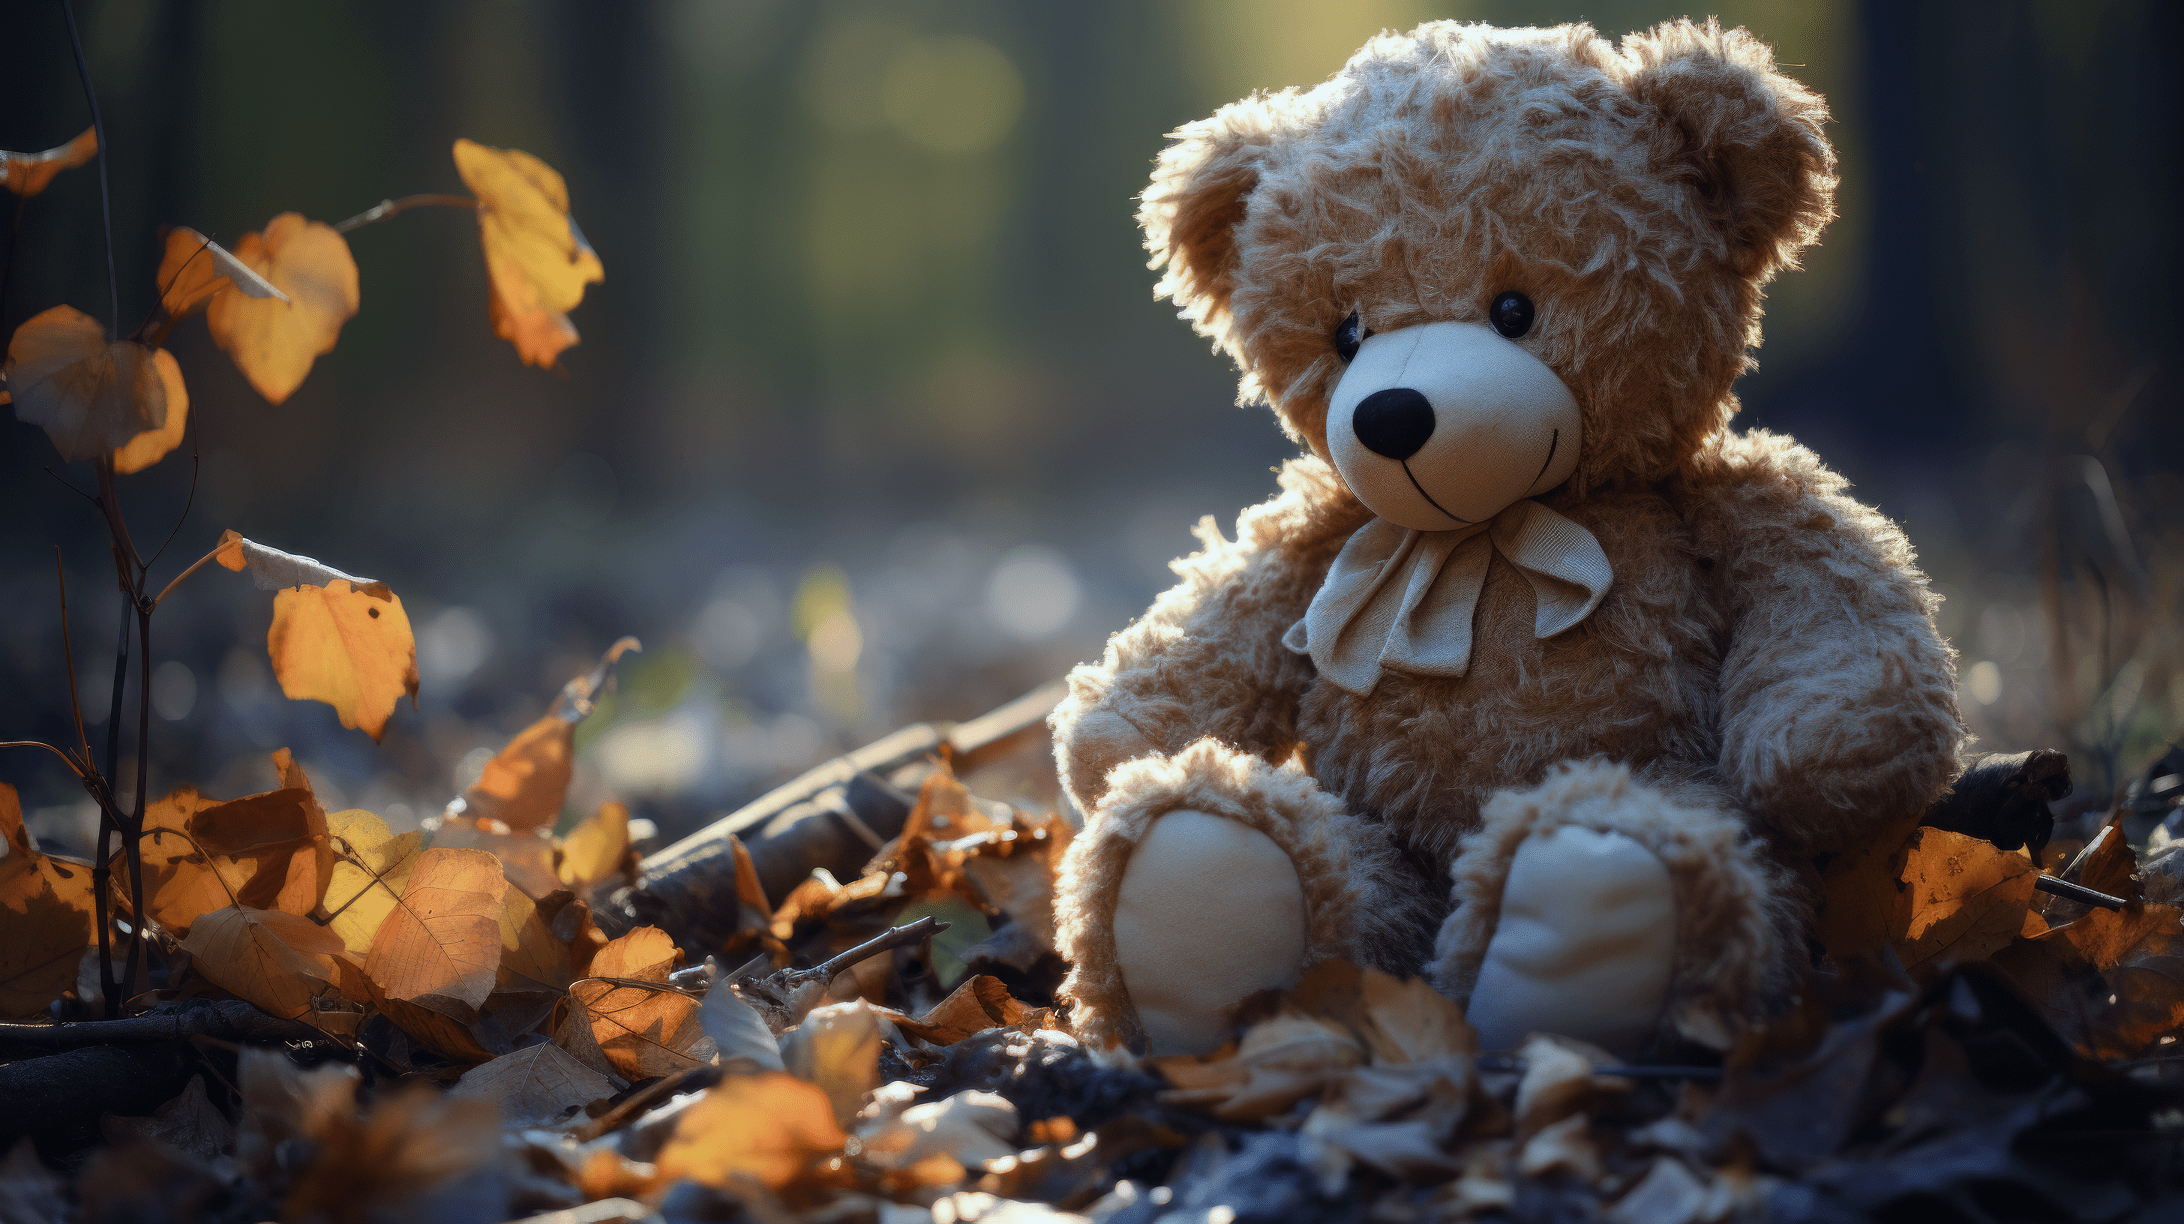 Teddy Bear HD Wallpaper and Background